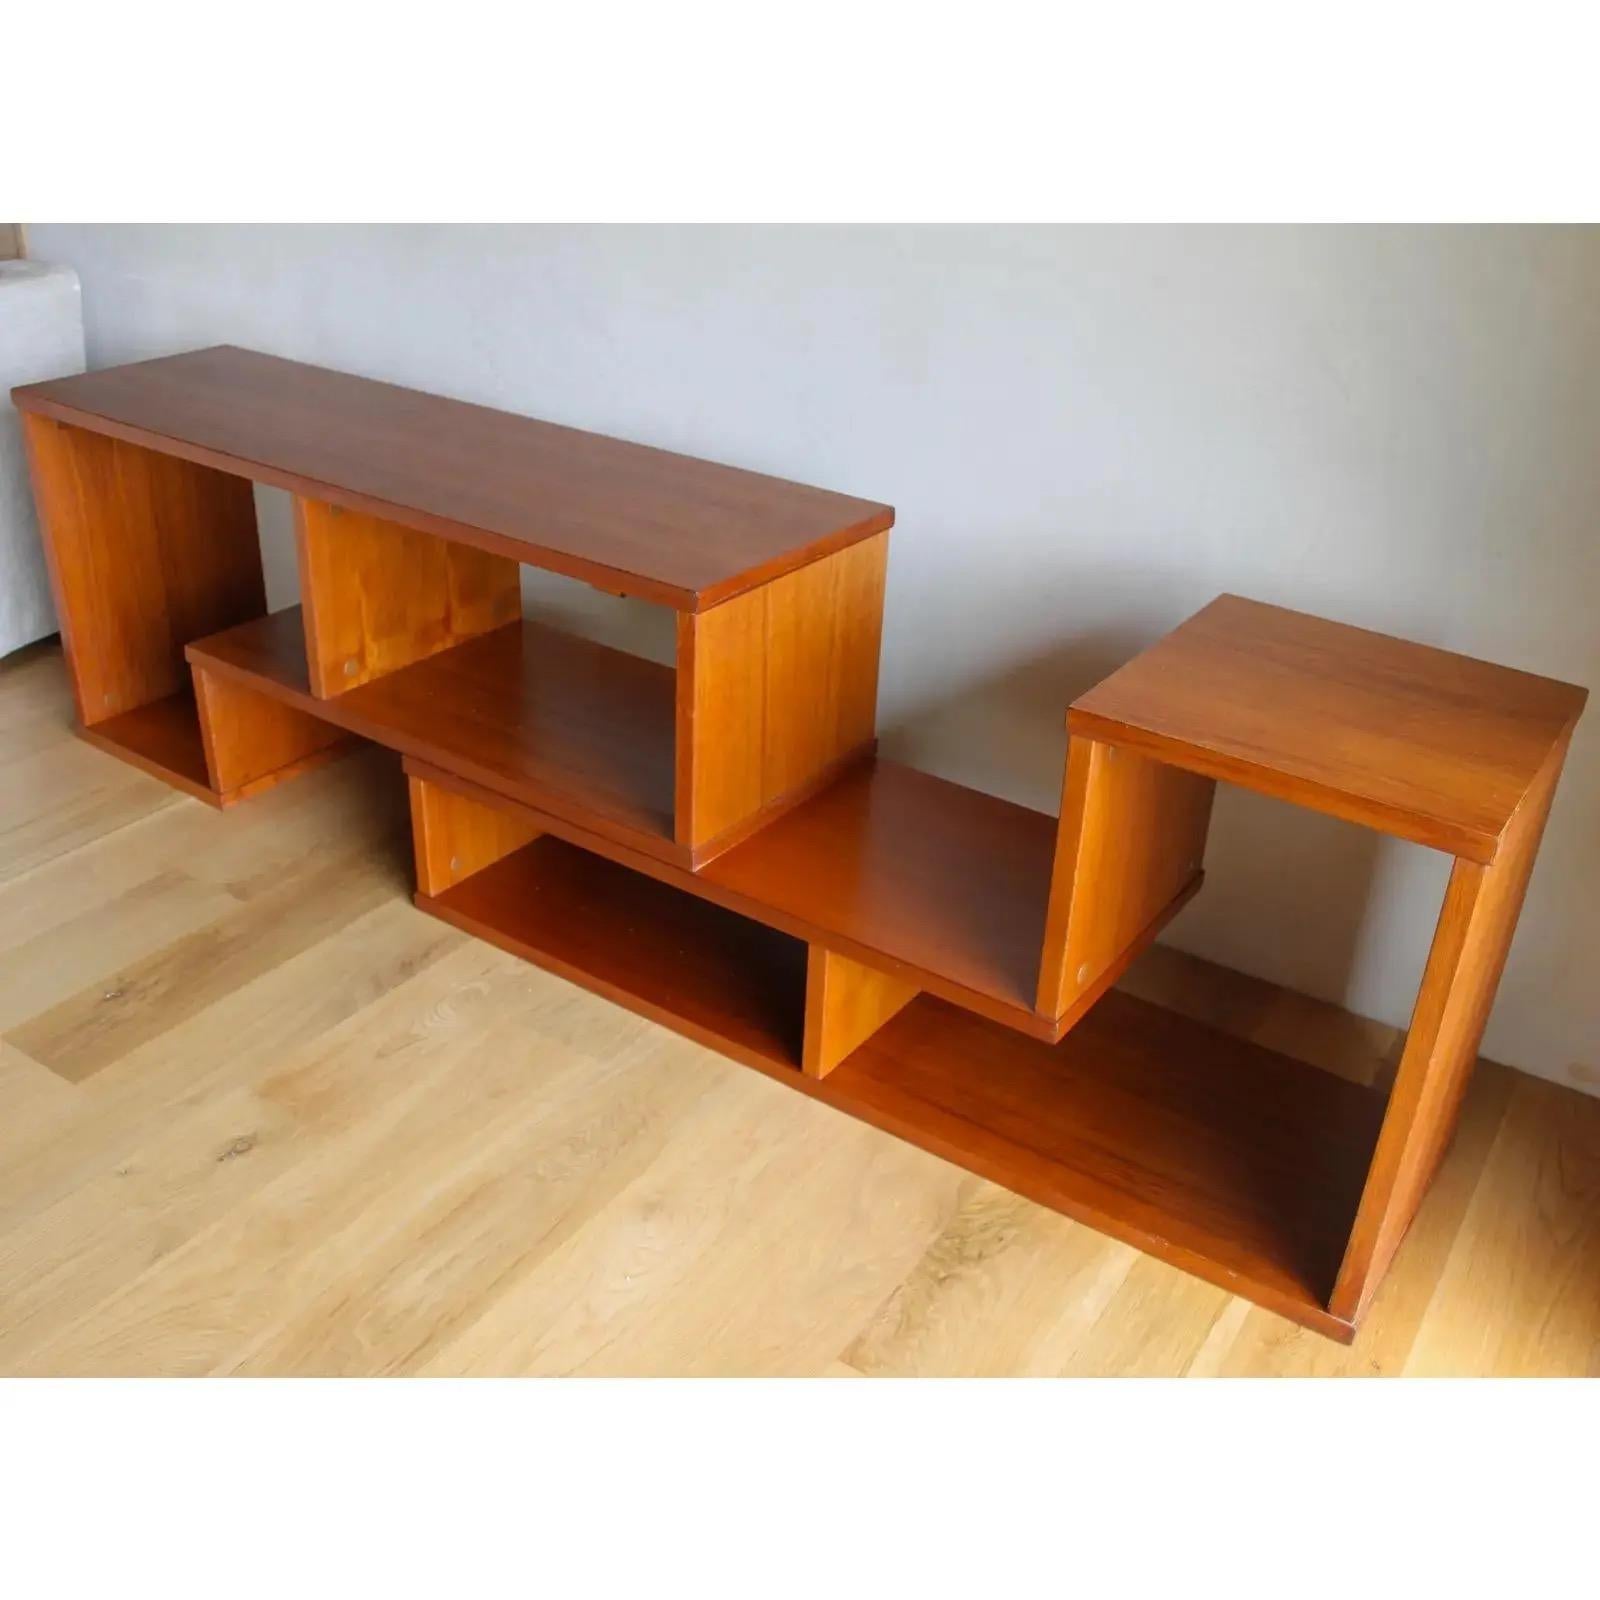 Gorgeous, heavy and well-made geometric interlocking Danish teak shelving units that can expand and contract to fit many spaces and needs.
The modular design ensures usefulness, longevity and spatial fit in any size space and design scheme. 
Each